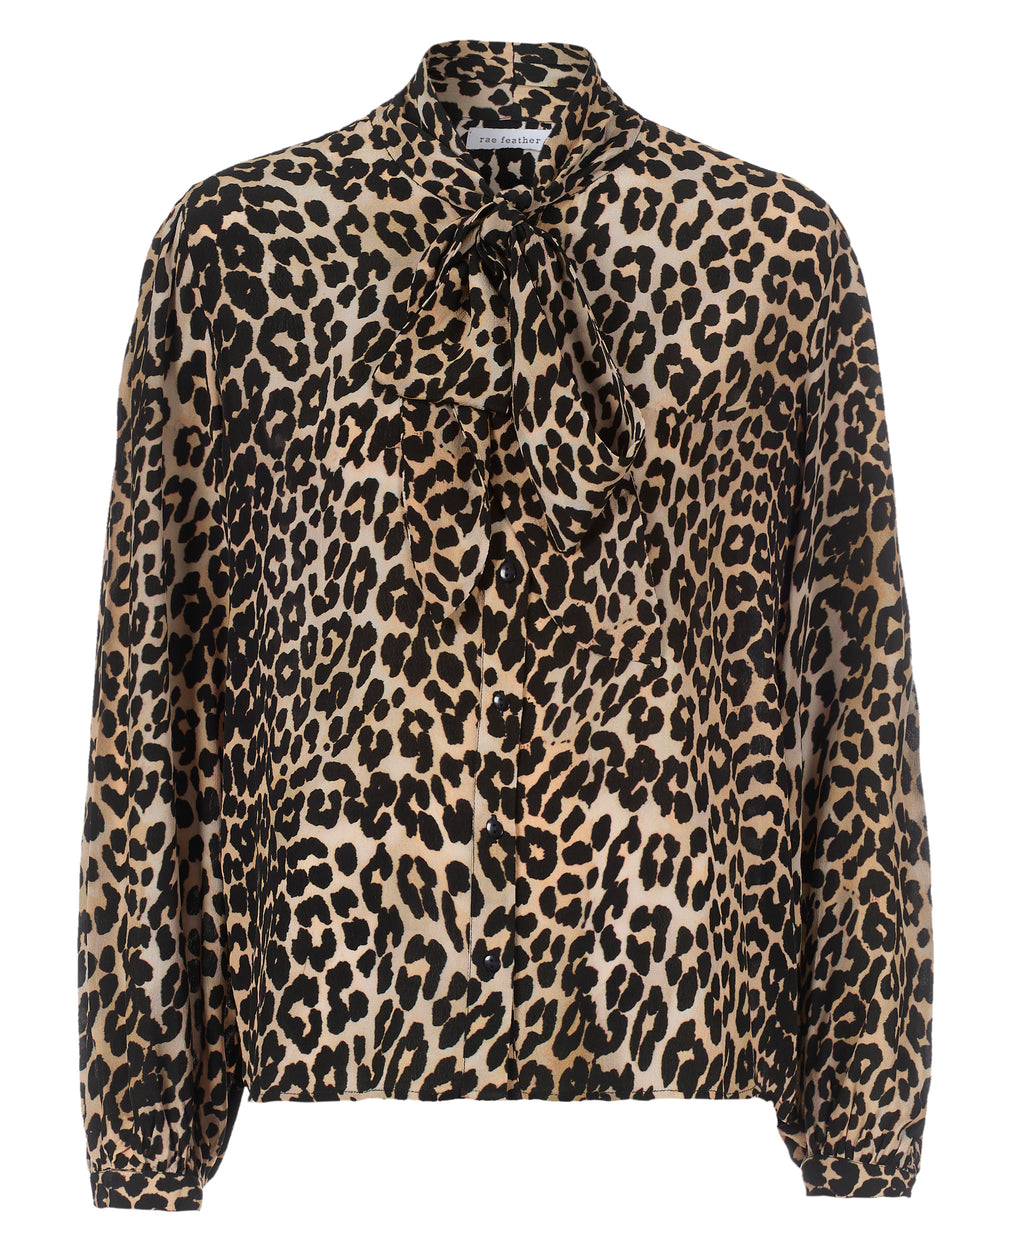 Fran Leopard Blouse | Tops & Shirts | Clothing | Rae Feather